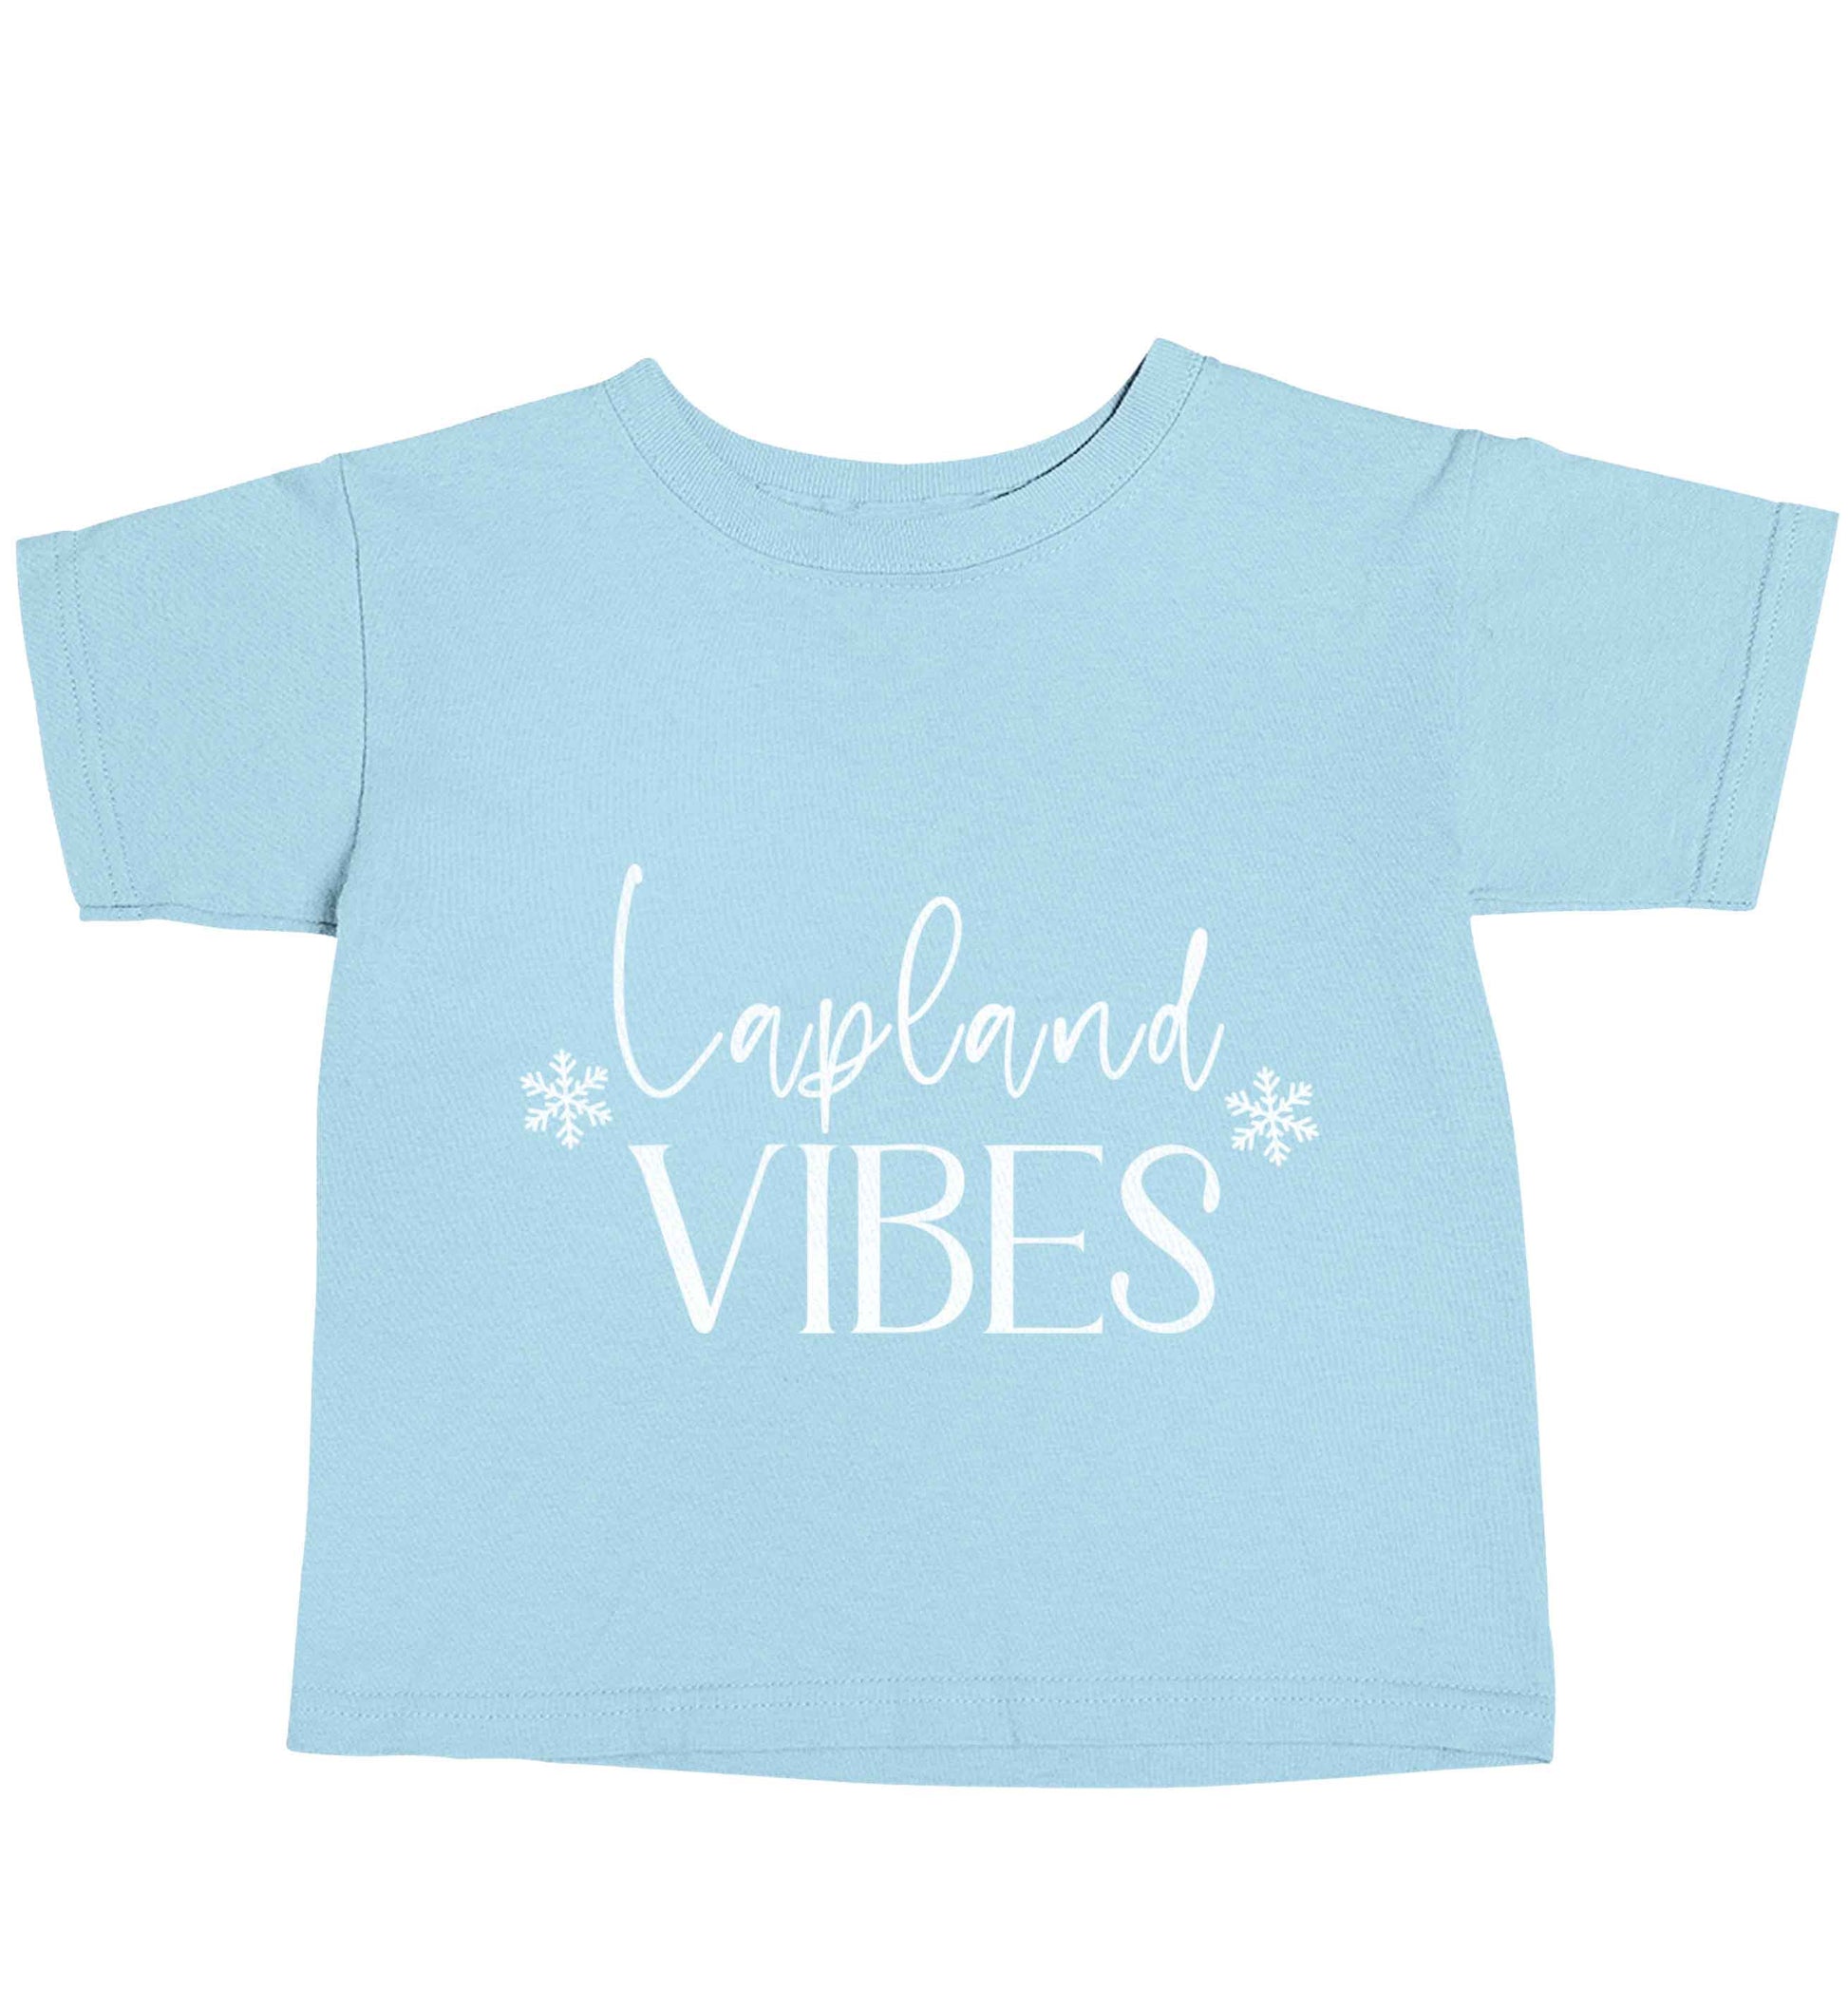 Lapland vibes light blue baby toddler Tshirt 2 Years